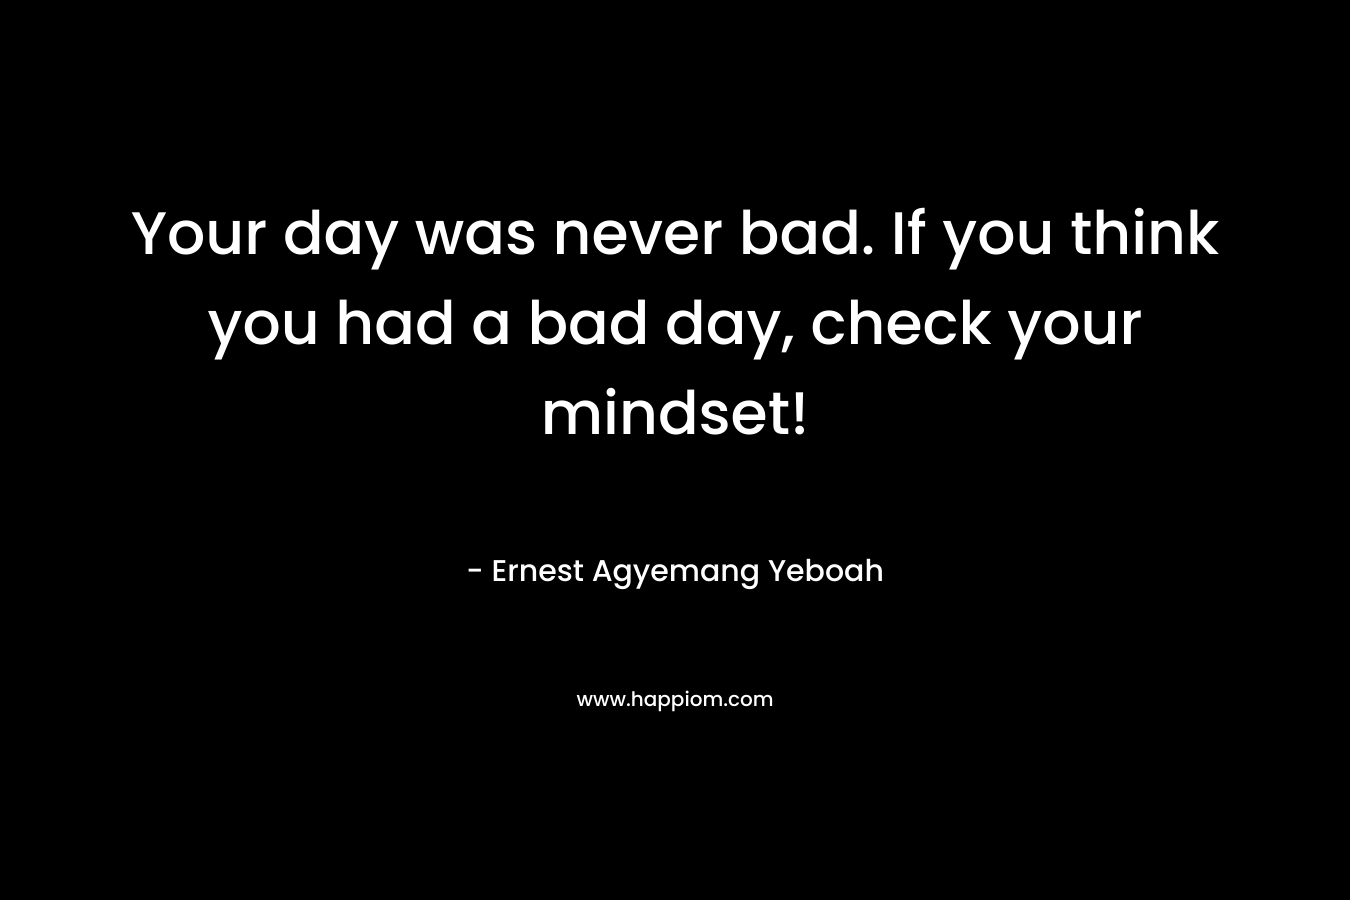 Your day was never bad. If you think you had a bad day, check your mindset!